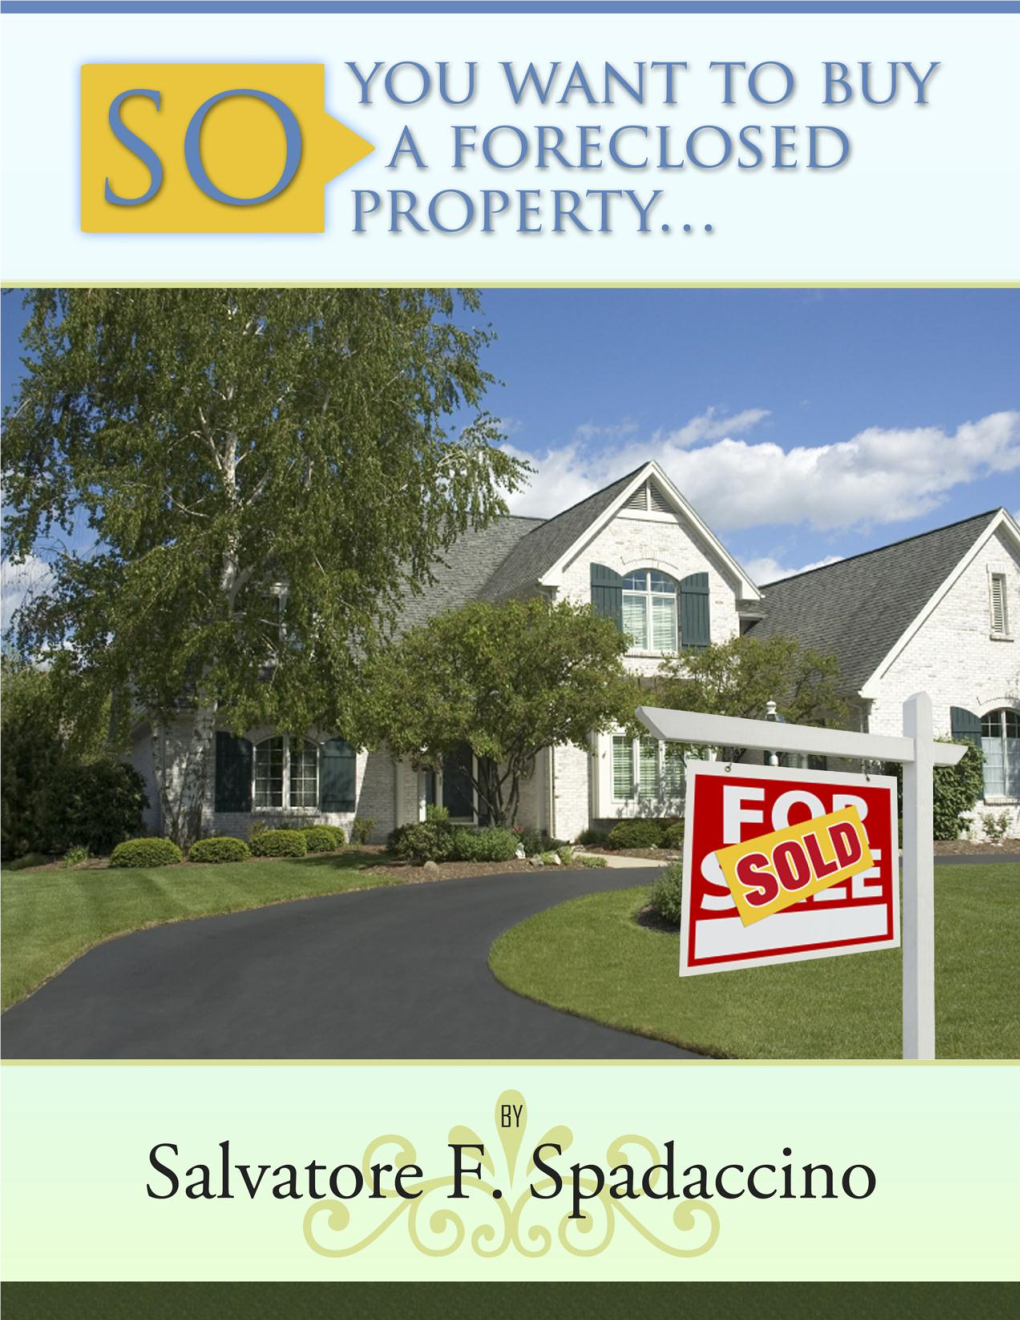 So, You Want to Buy a Foreclosed Property